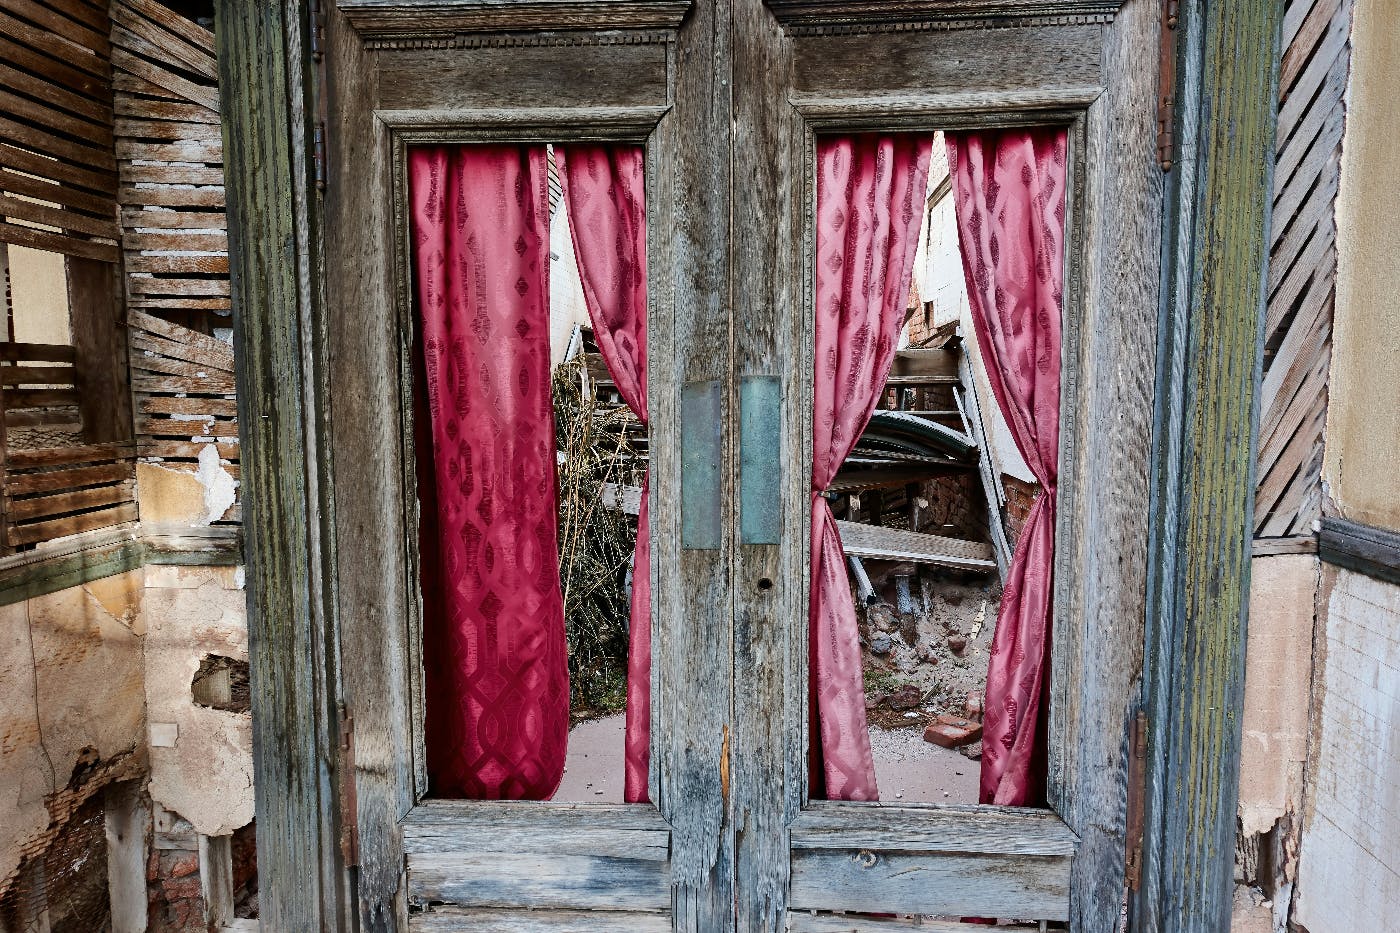 Interior of a crumbling house with red curtains on the windows